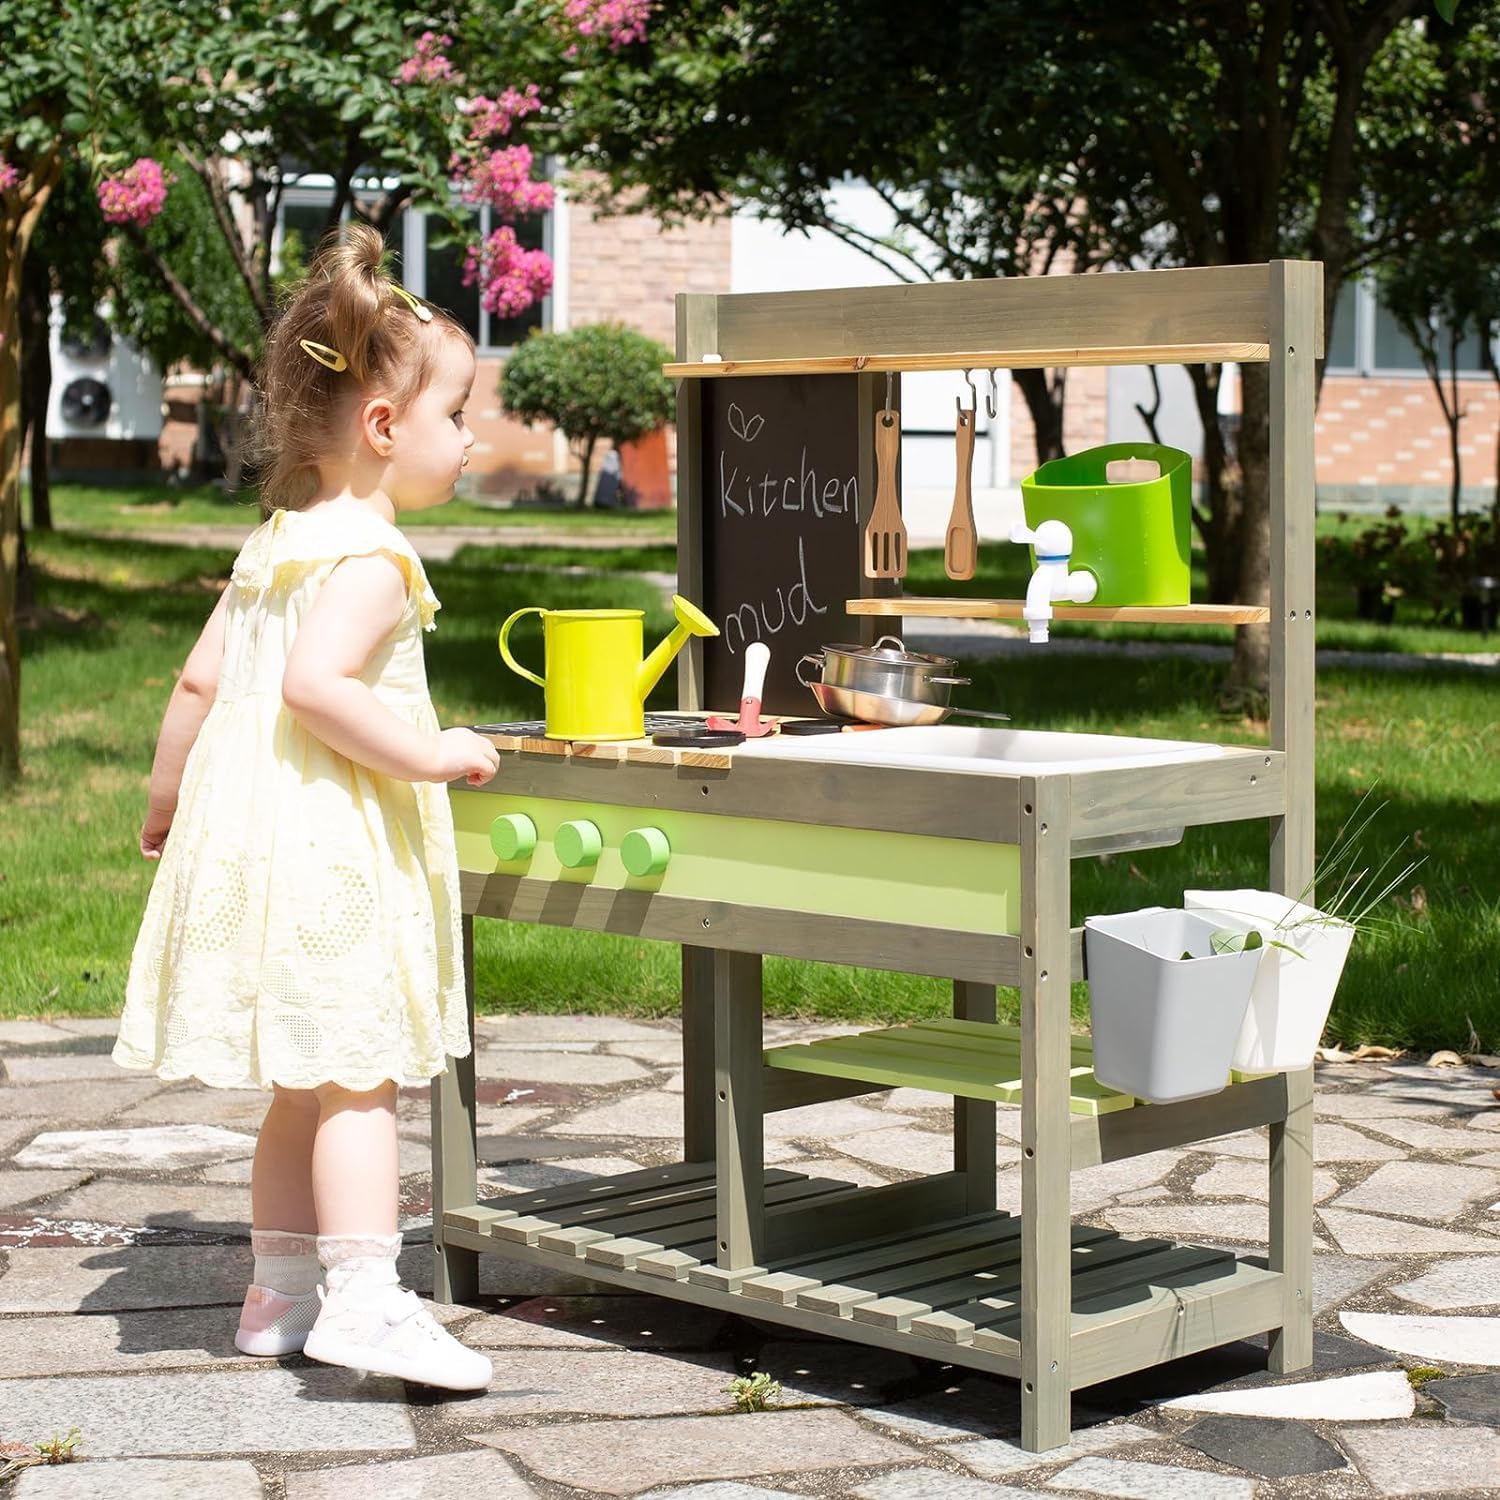 Giant bean Mud Kitchen Playset for Kids, Deluxe Wooden Toy Play Kitchen Set for Boys and Girls Ages 3-8 Indoor & Outdoor Activities, with Sand and Water Sink, Cookware Pots and Kitchen Accessories